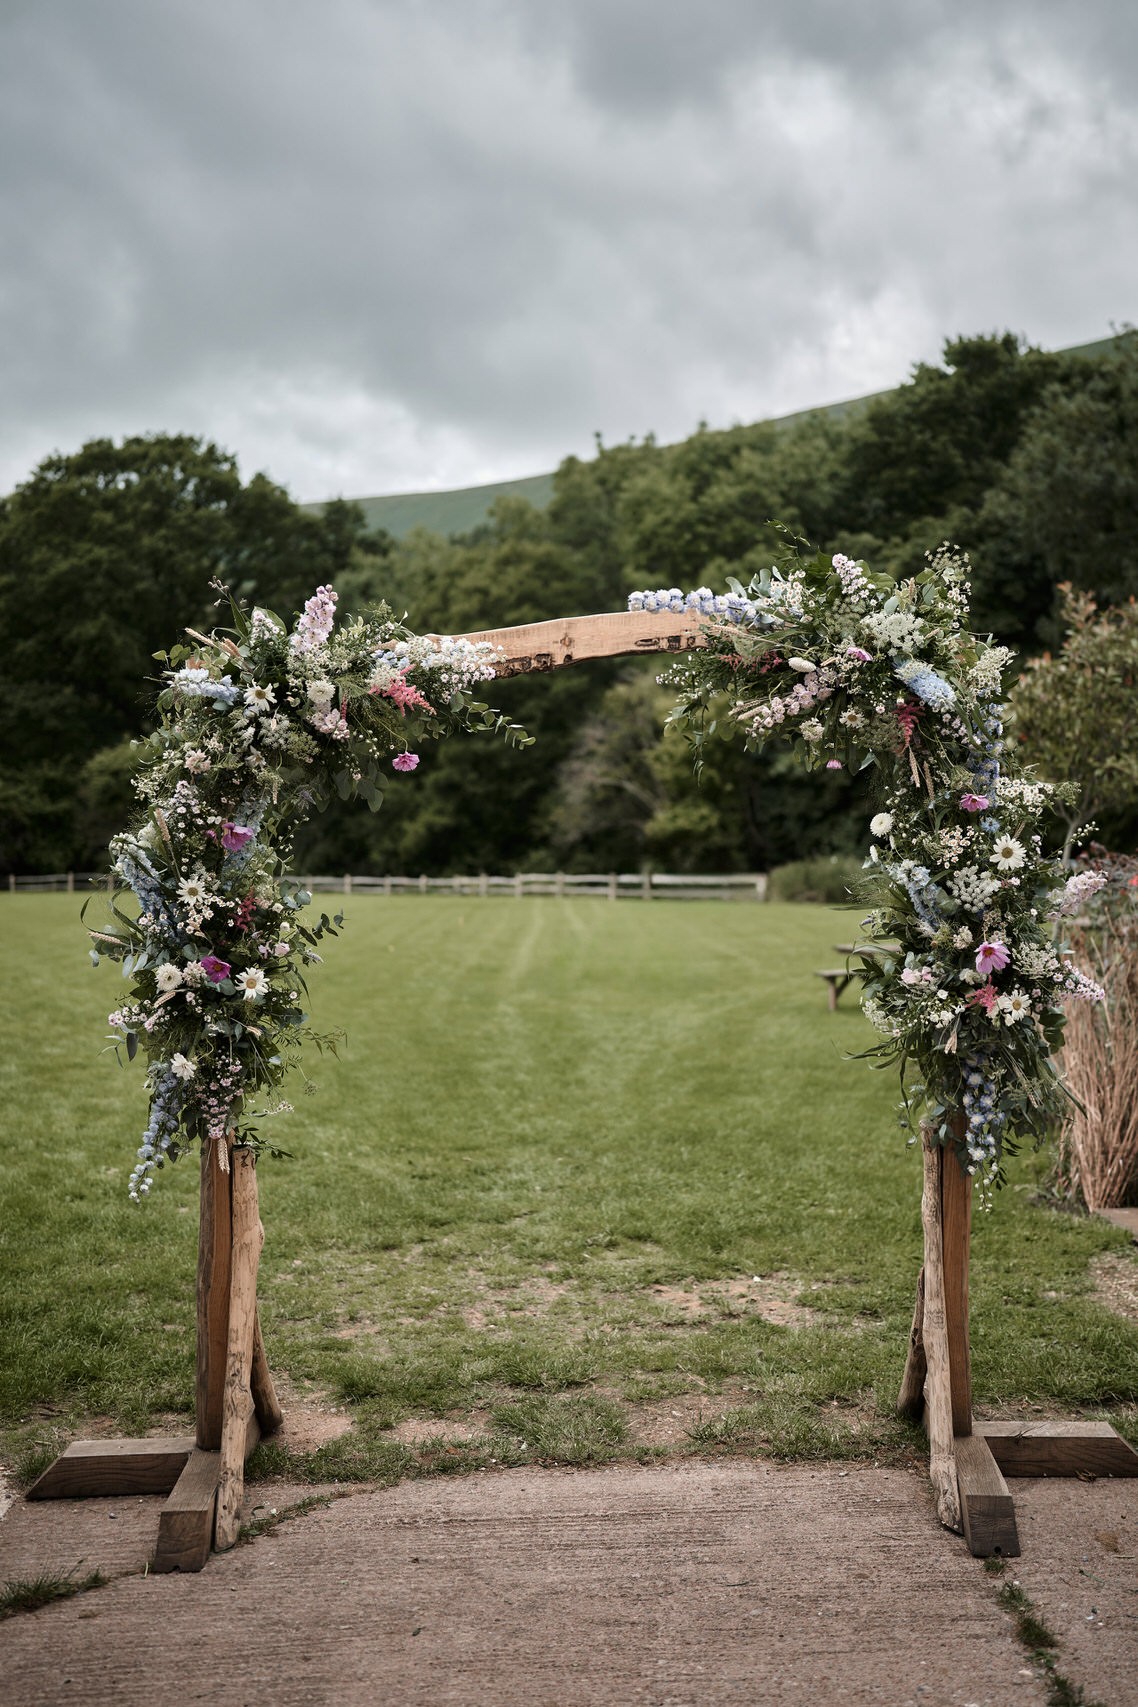 A wedding arch made of wood in a field full of flowers.